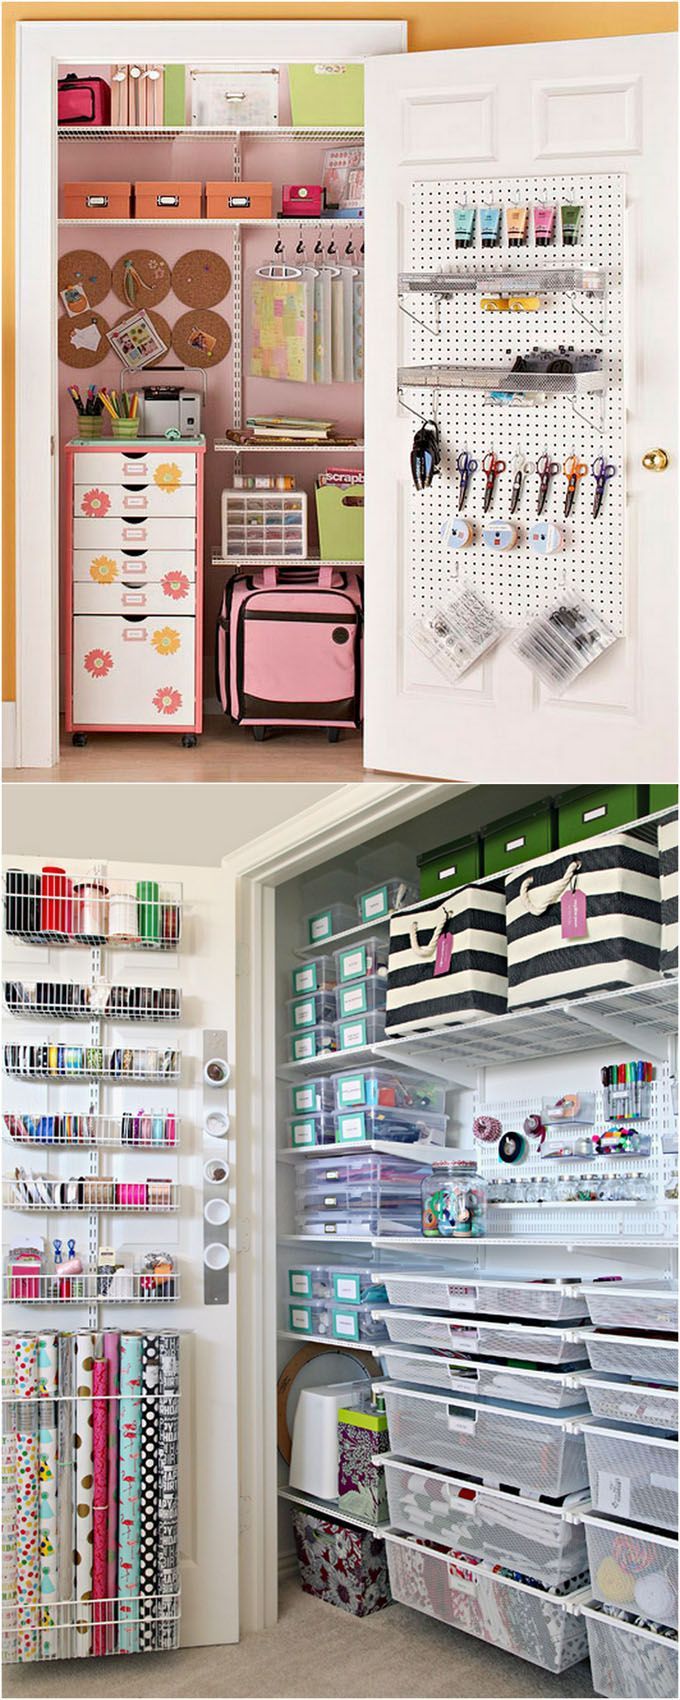 21 great ways to completely organize your workshop or craft room: how to best utilize pegboards, shelving, closet and wall spaces,